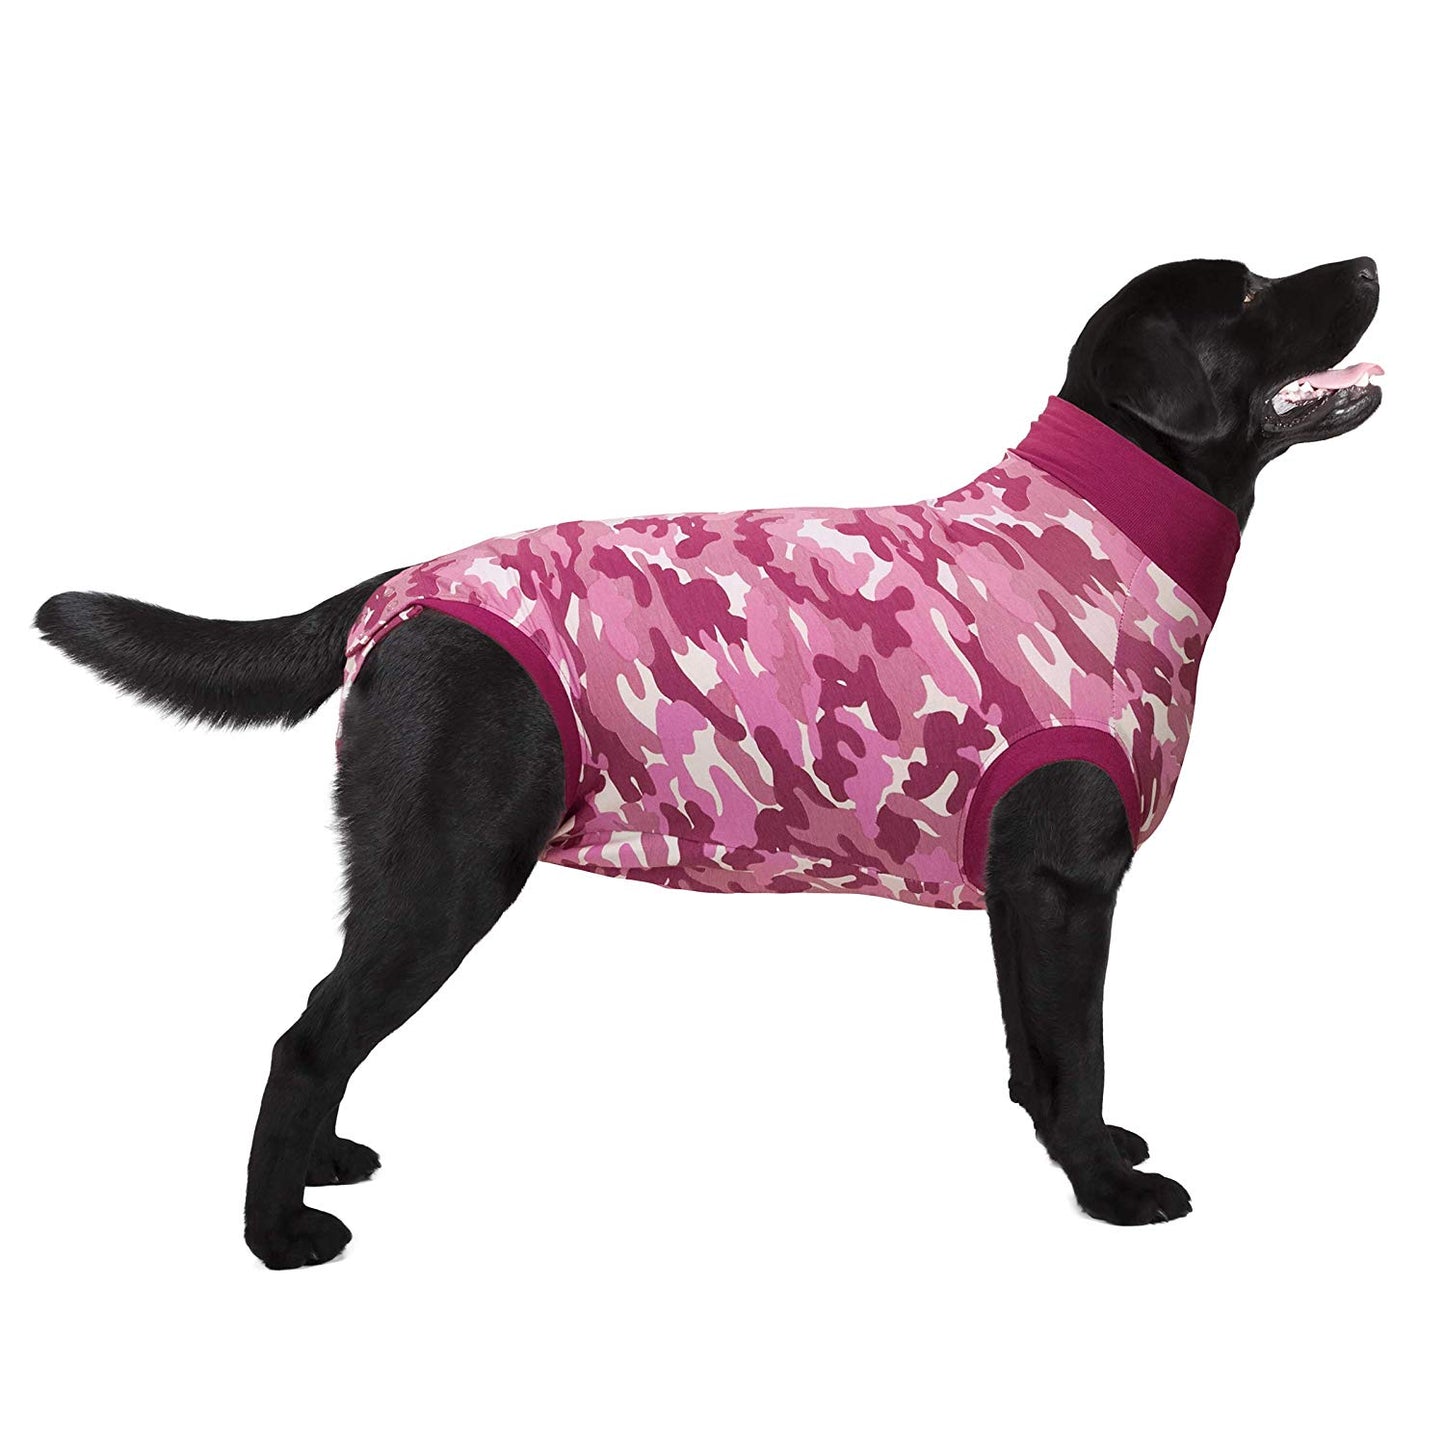 Suitical Recovery Suit for Dogs - Pink Camo - size X-Small